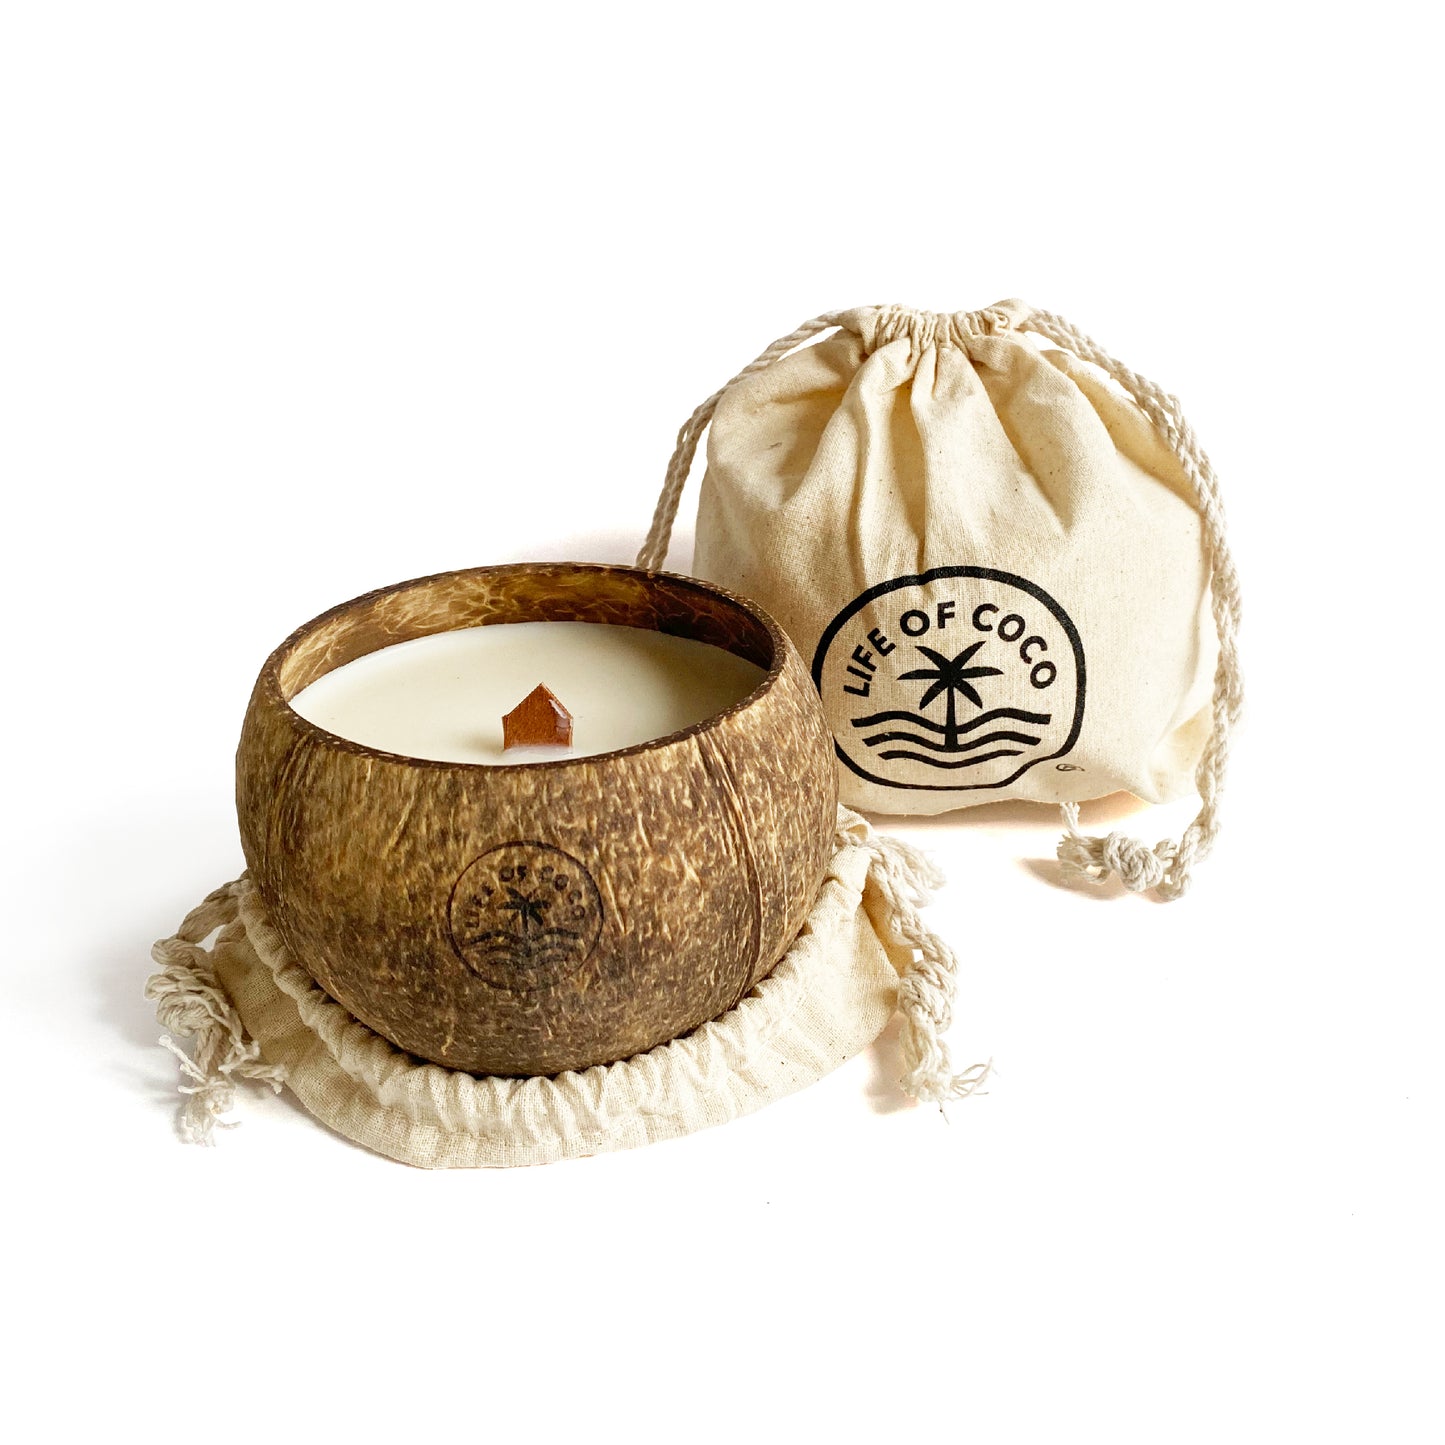 life of coco coconut candles wholesale